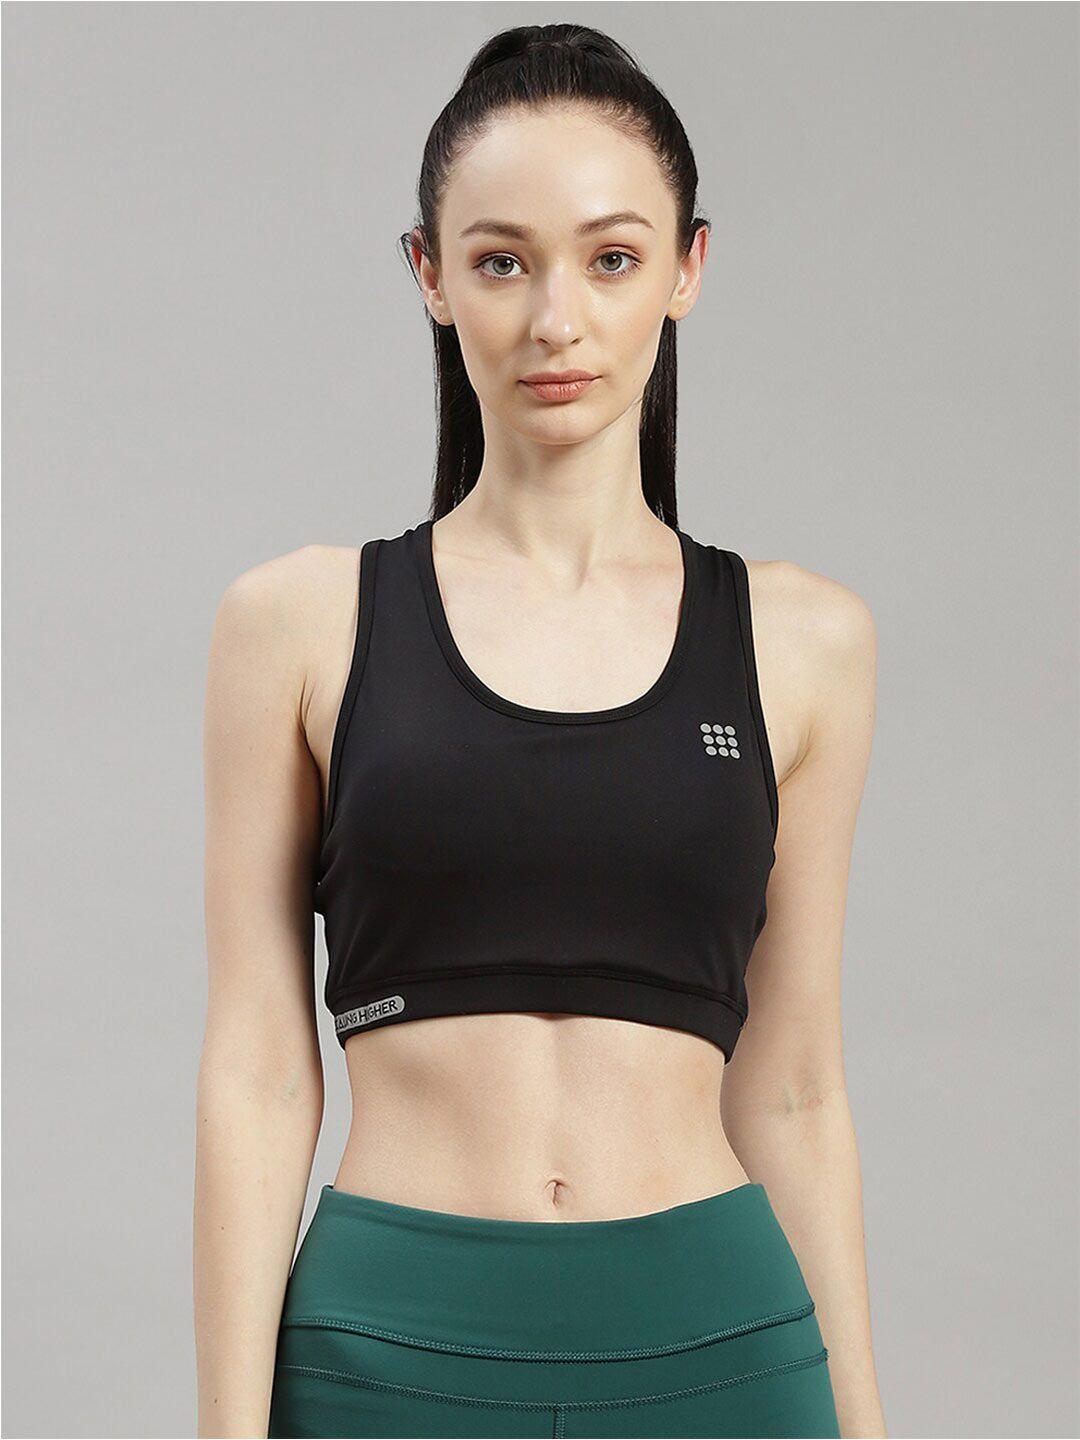 rock.it full coverage all day comfort seamless workout bra